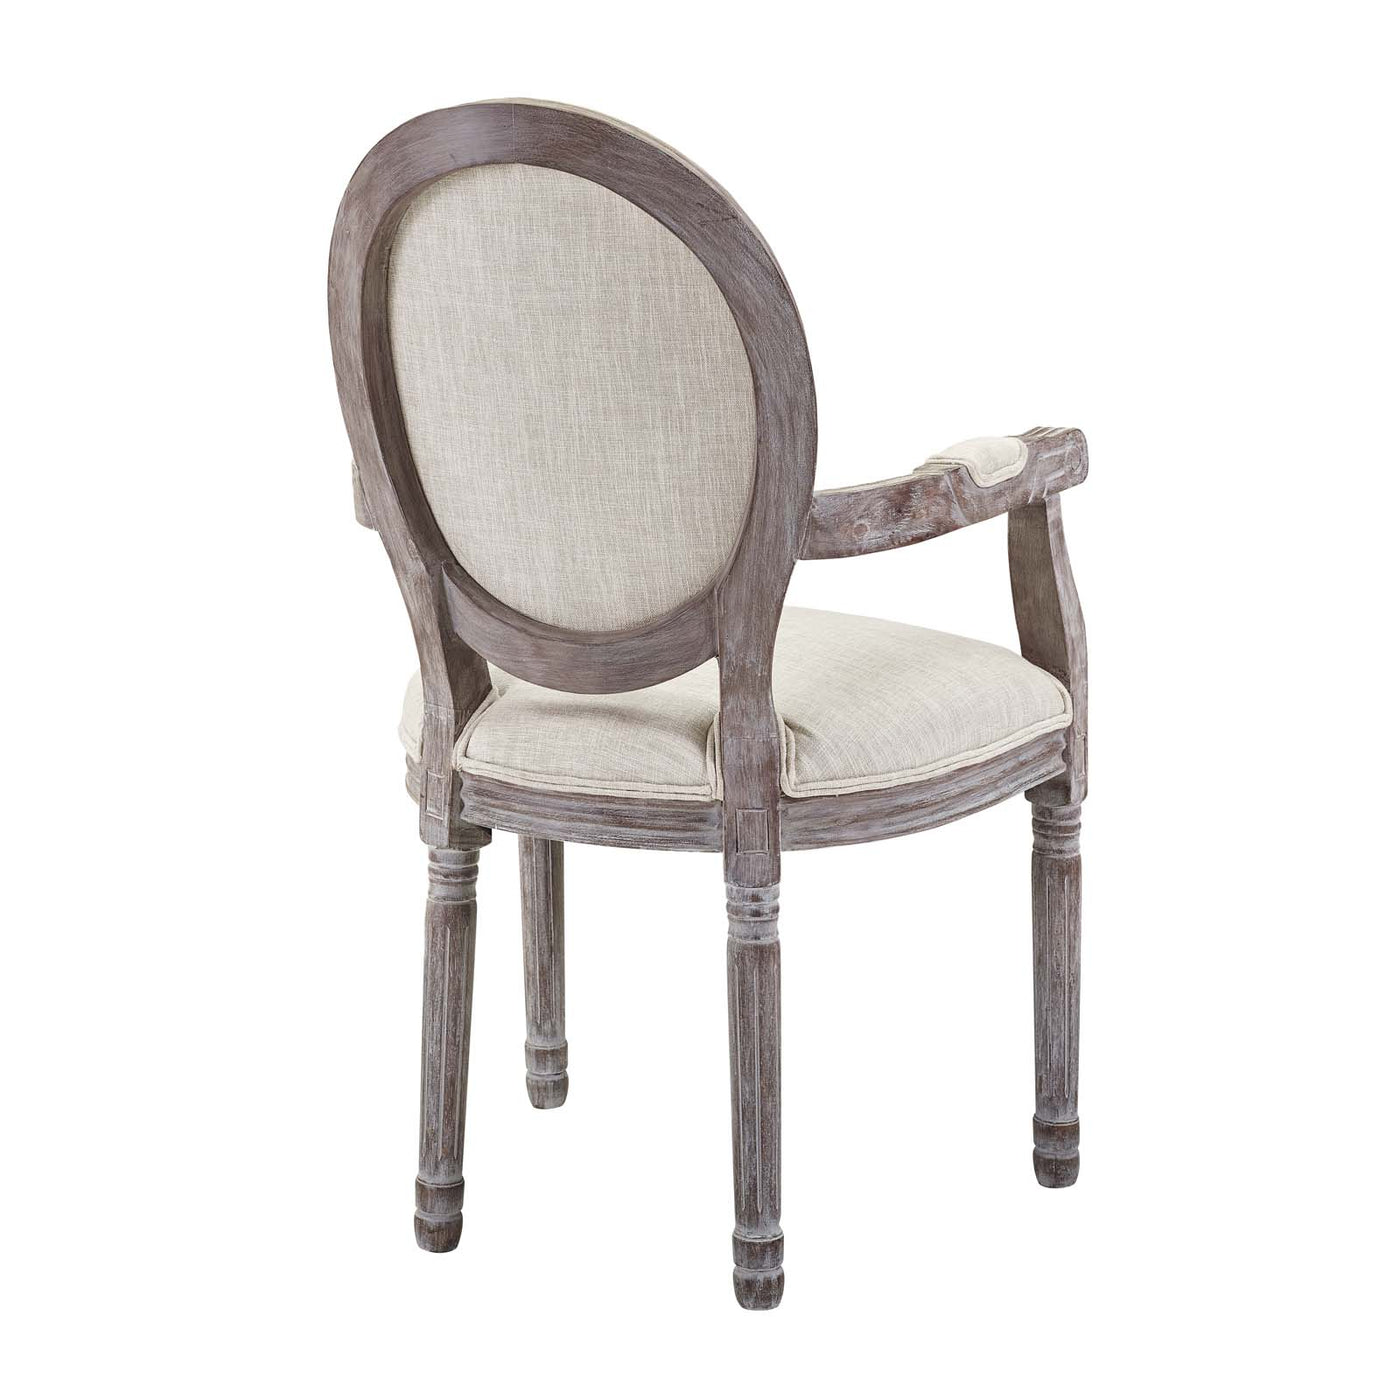 Emanate Vintage French Upholstered Fabric Dining Armchair